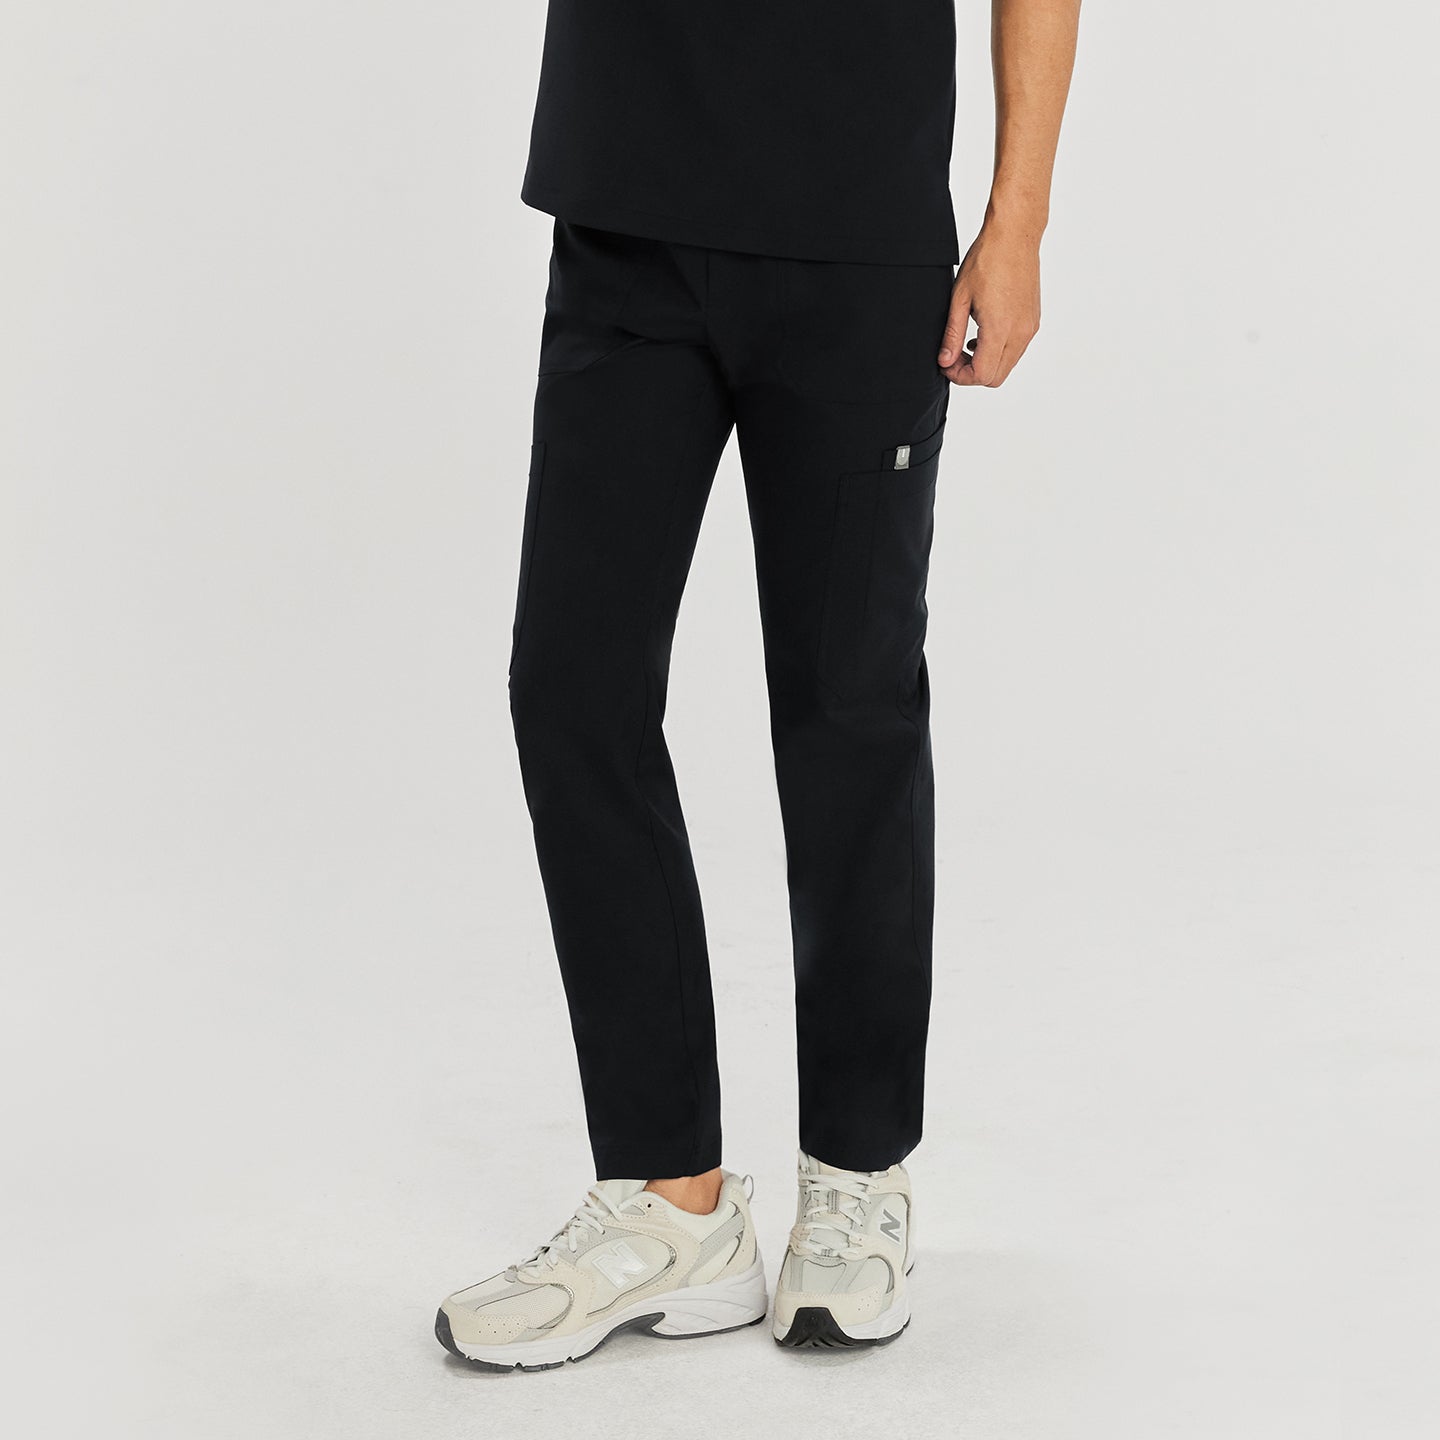 Model wearing zipper straight scrub pants with zipper details and side pockets, paired with a V-neck scrub top and white sneaker,Eco Black